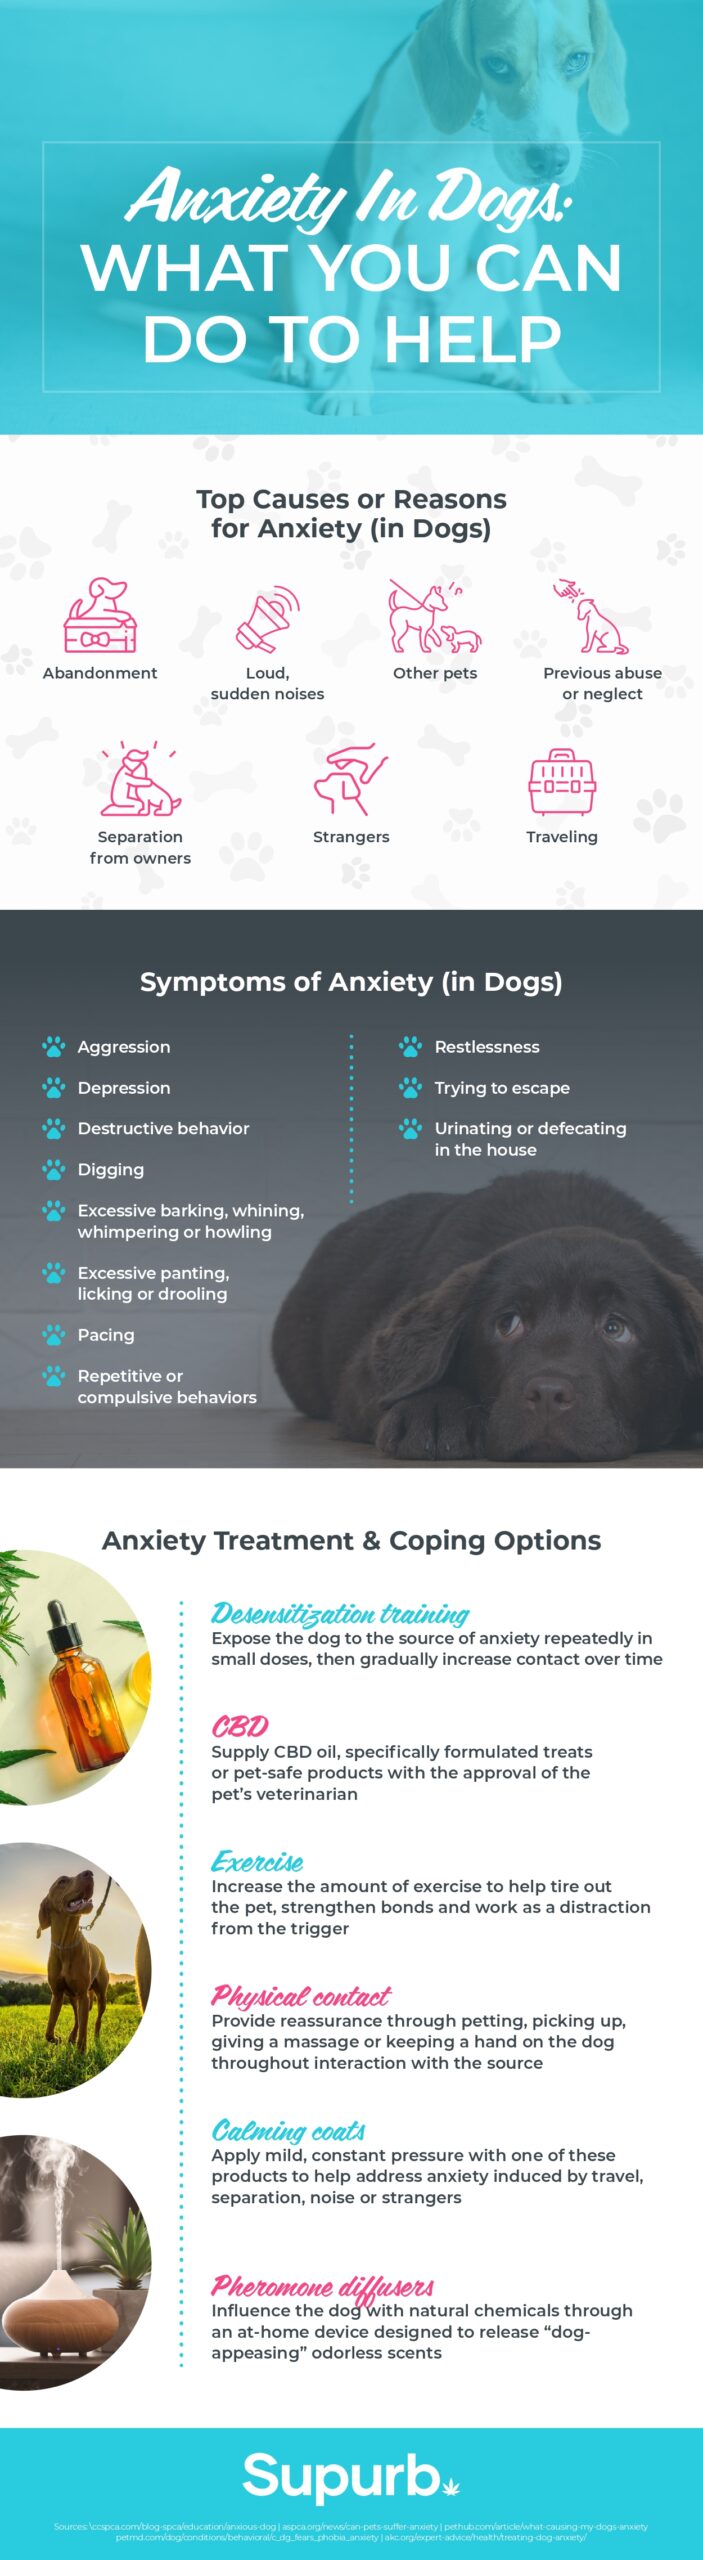 Anxiety In Dogs: What You Can Do To Help